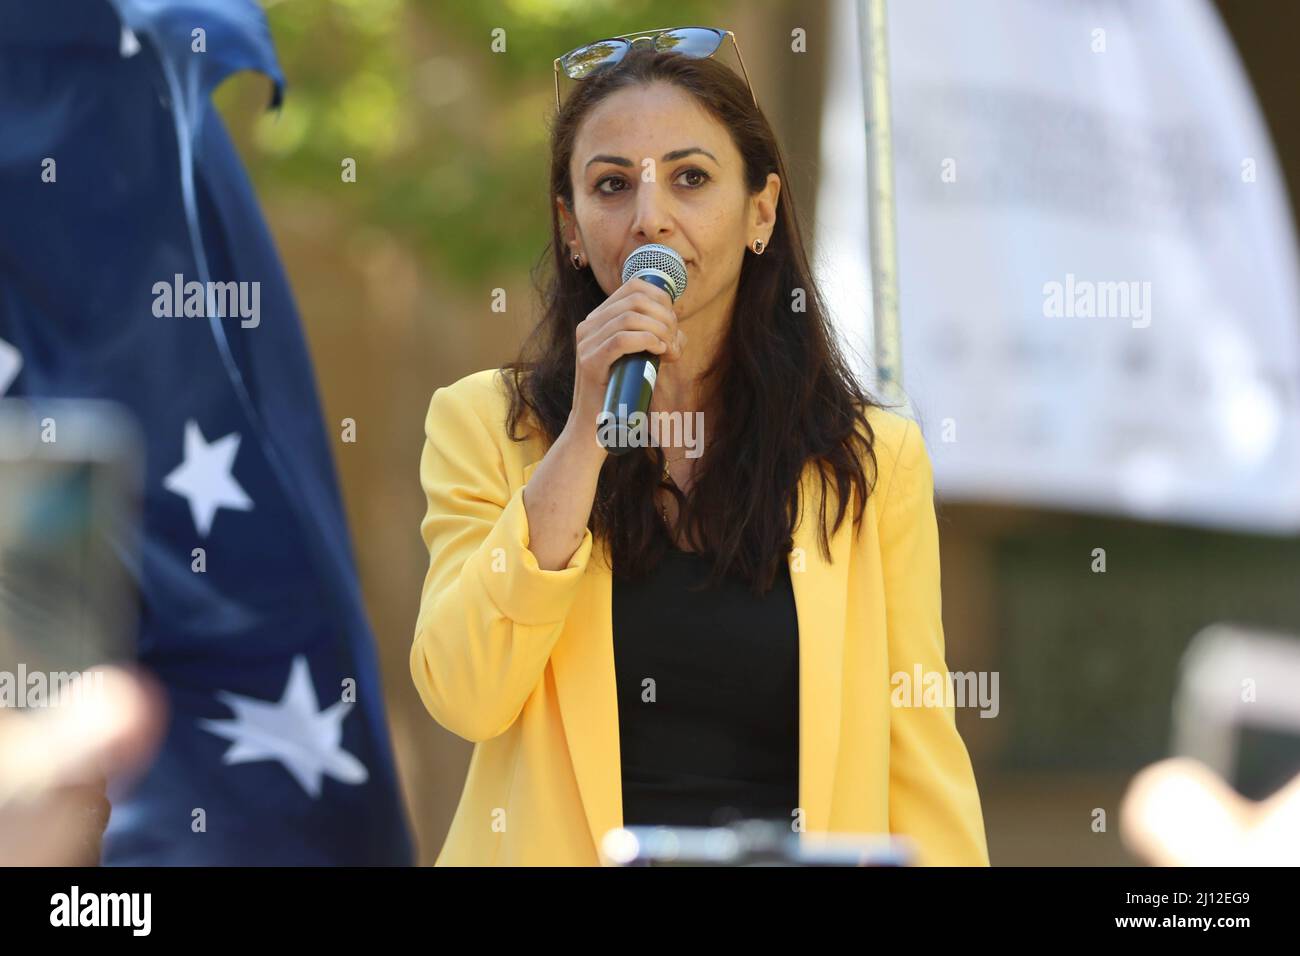 Sydney, Australia. 22nd March 2022. Protesters against vaccine mandates held a rally outside the NSW State Parliament building on Macquarie Street. Pictured: Vanessa Hadchiti, UAP (United Australia Party) candidate for the Sydney federal electorate. Credit: Richard Milnes/Alamy Live News Stock Photo